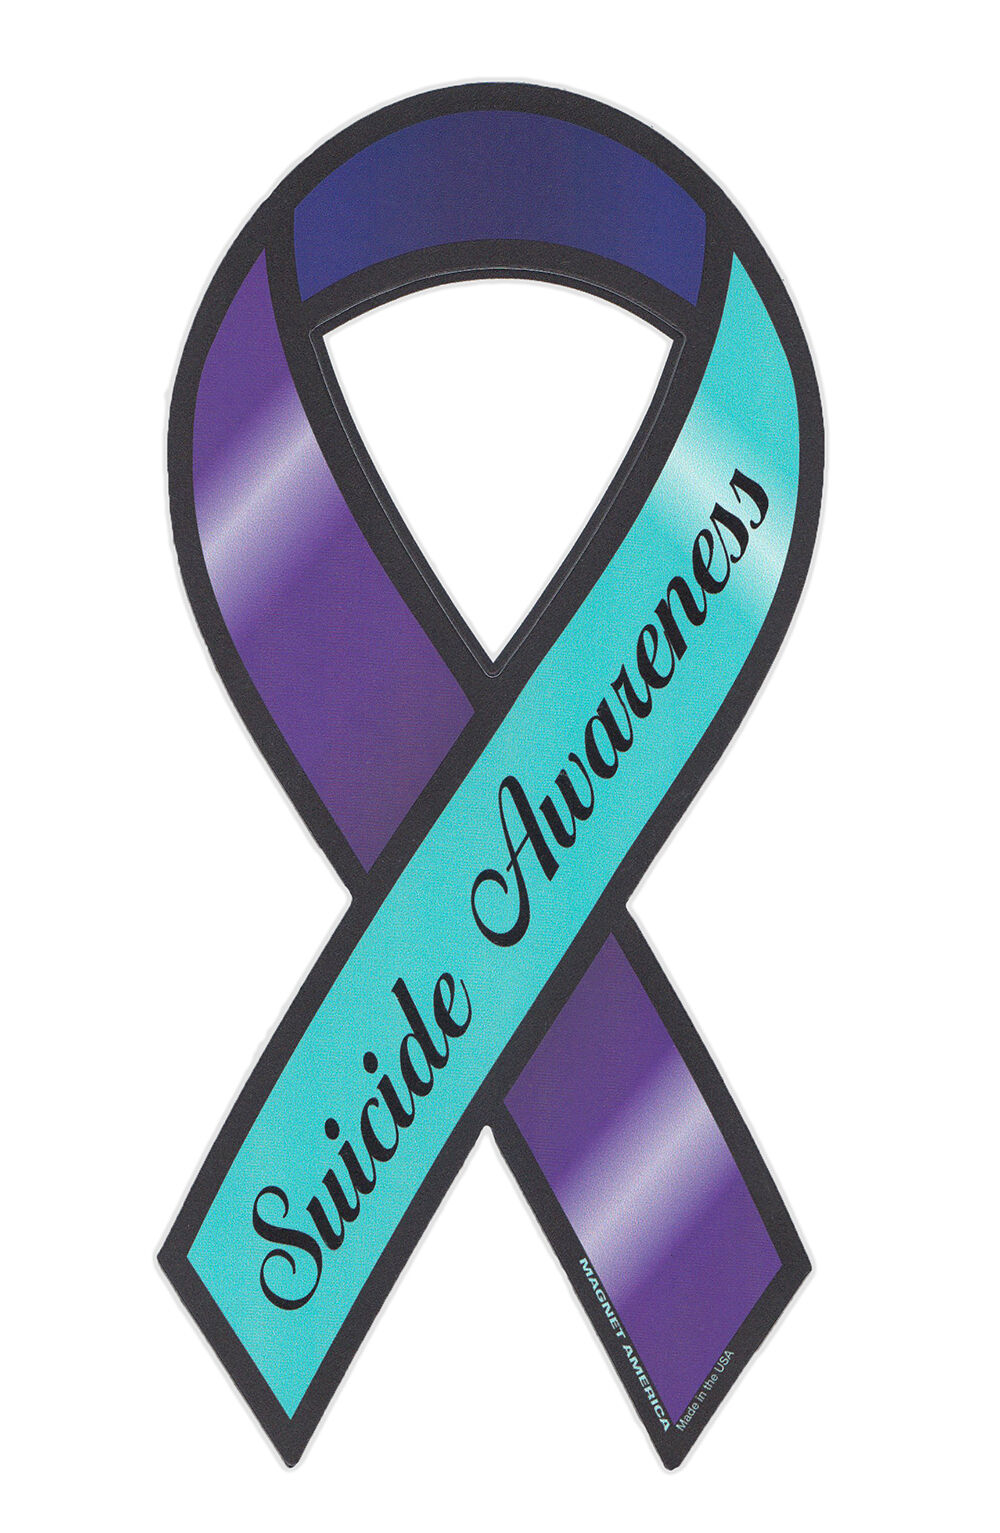 Magnetic Bumper Sticker - Suicide Awareness - Ribbon Shaped Support Magnet